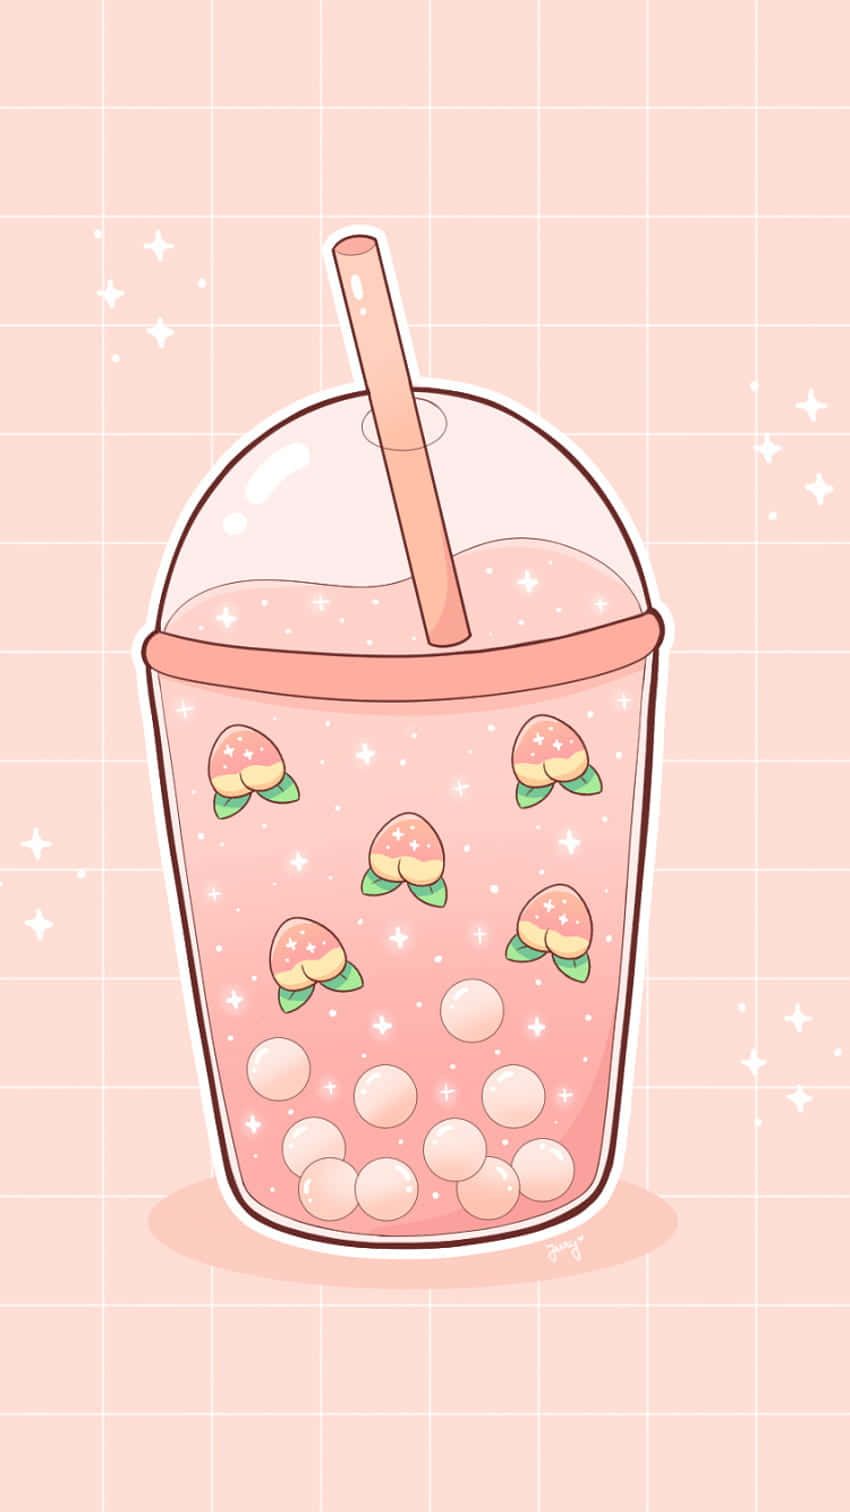 A pink drink with straw and cute cartoon characters - Boba